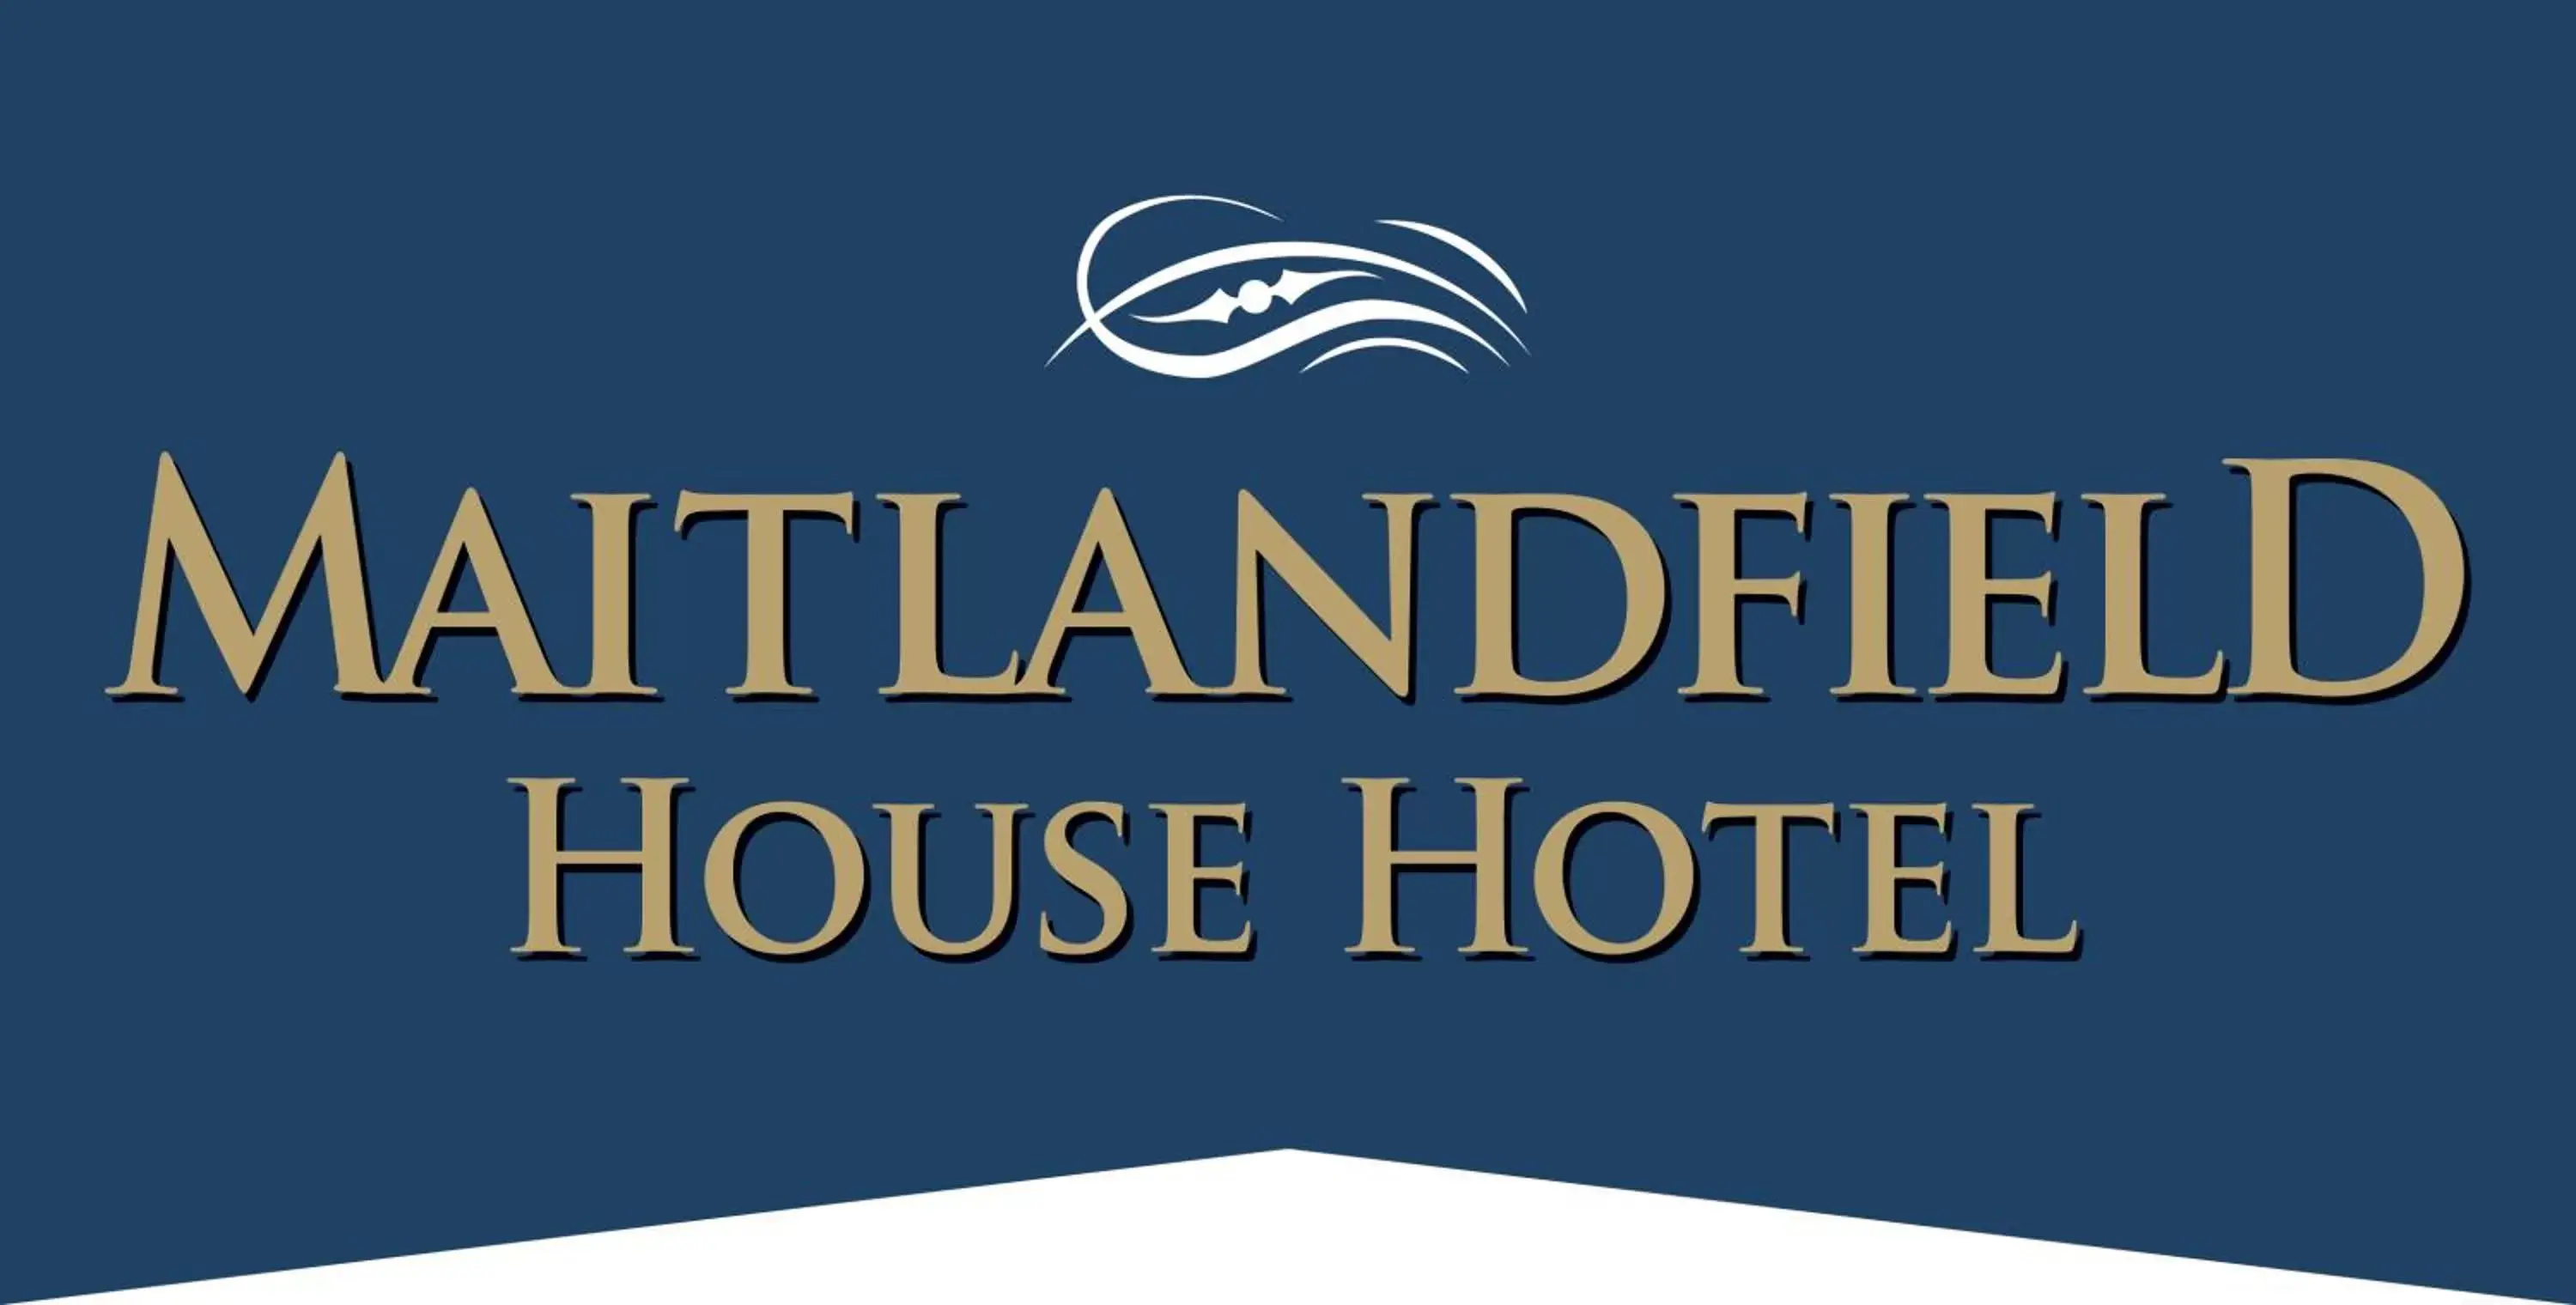 Property logo or sign in Maitlandfield House Hotel